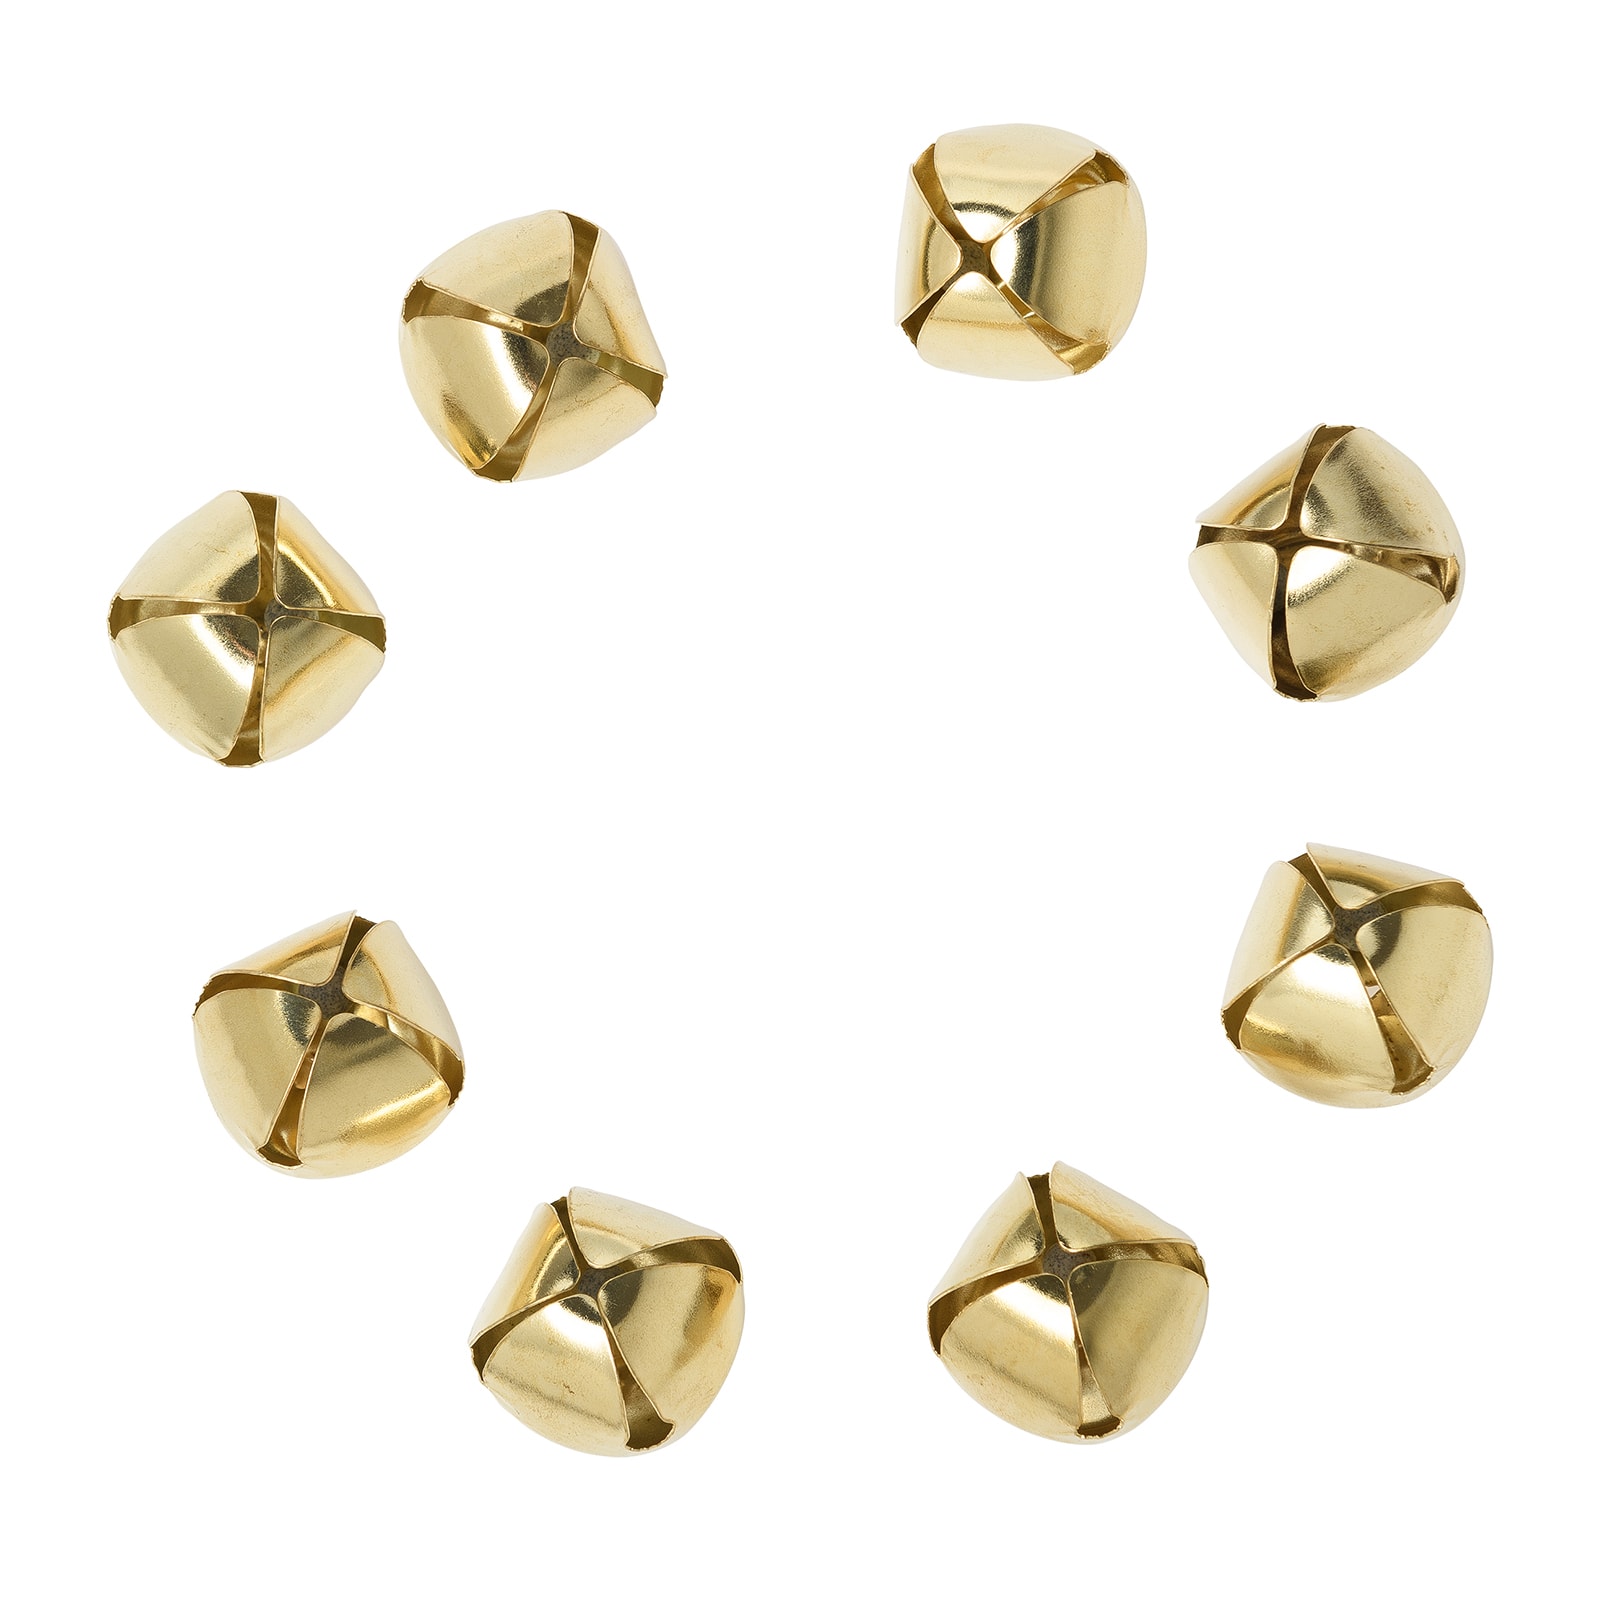 12 Packs: 8 ct. (96 total) 30mm Gold Jingle Bells by Creatology&#x2122;